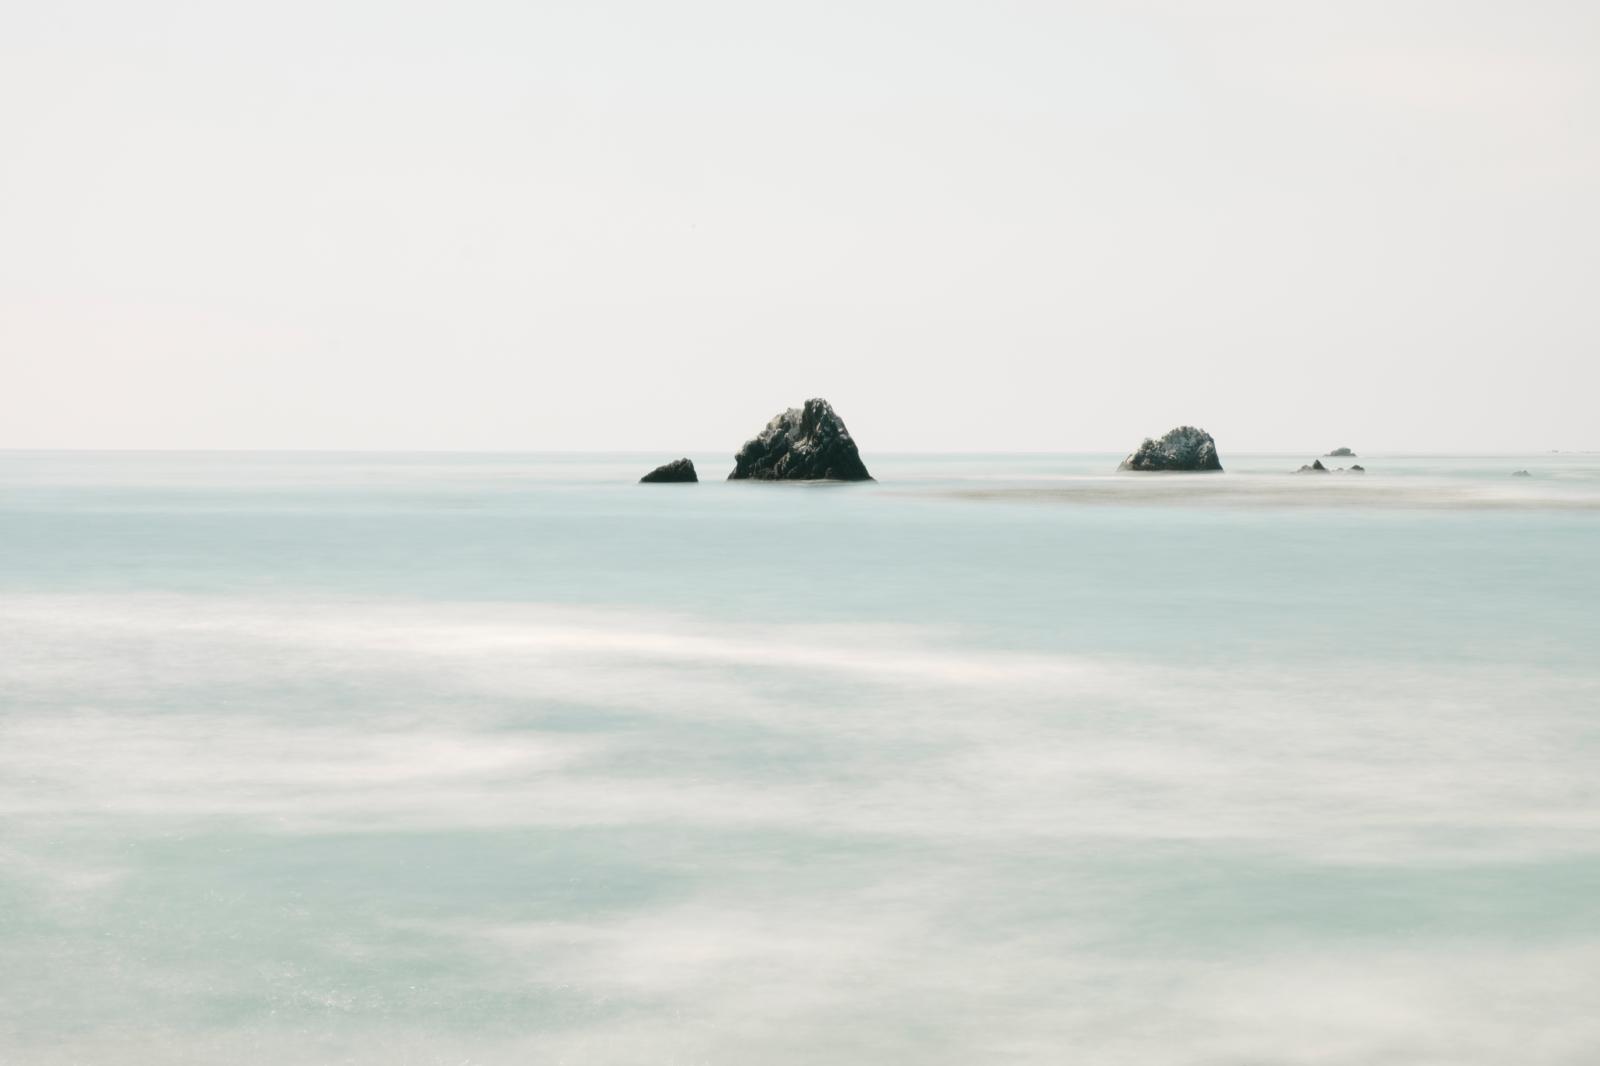 The Sea 9966 | Buy this image